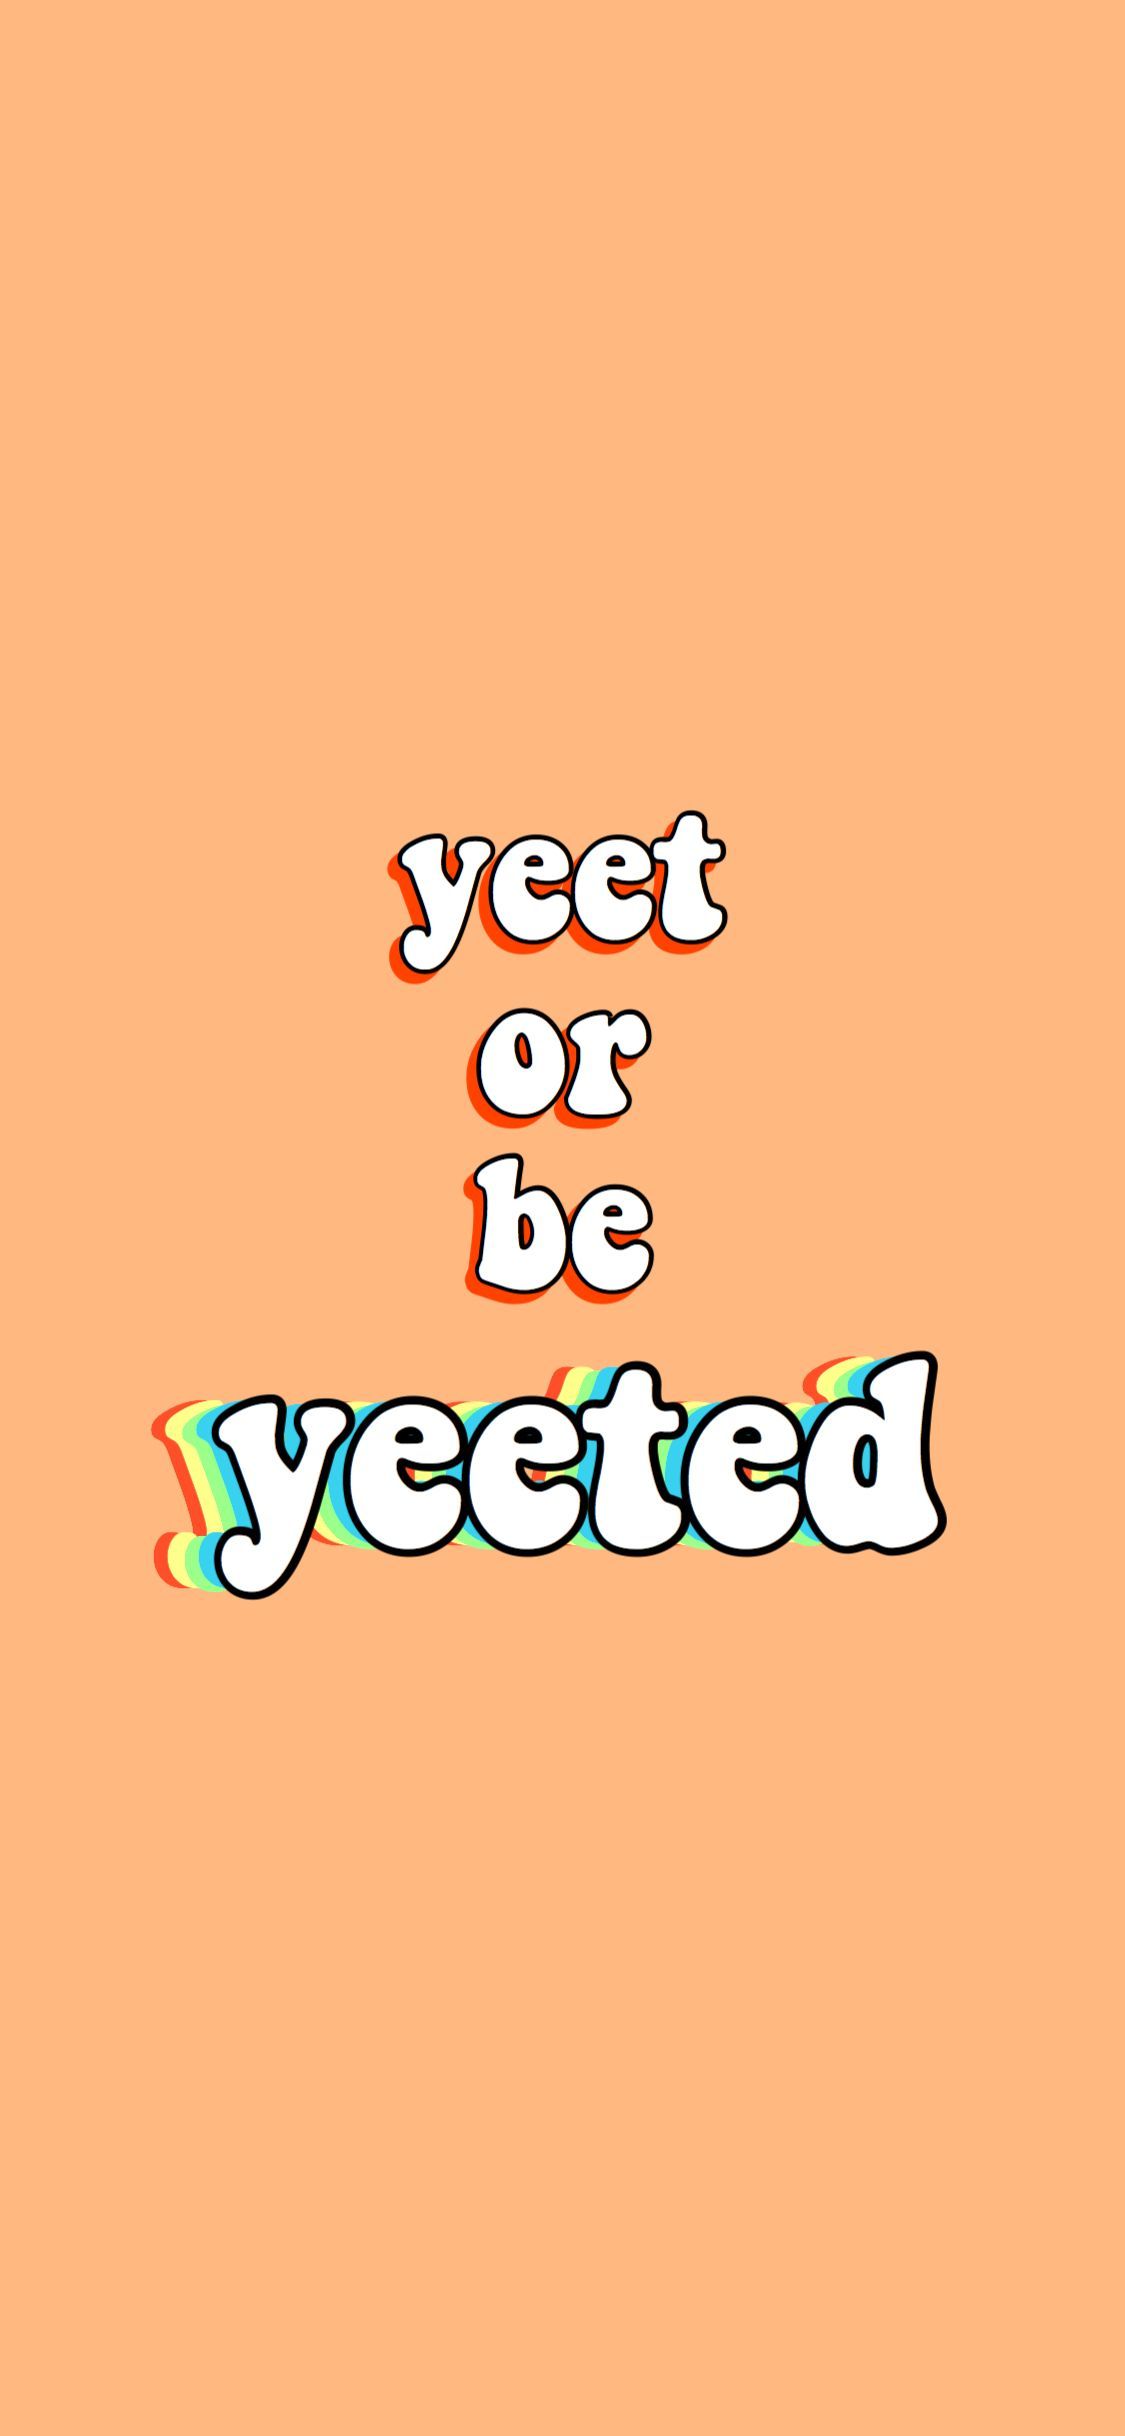 Wallpaper Yeet Or Be Yeeted Background